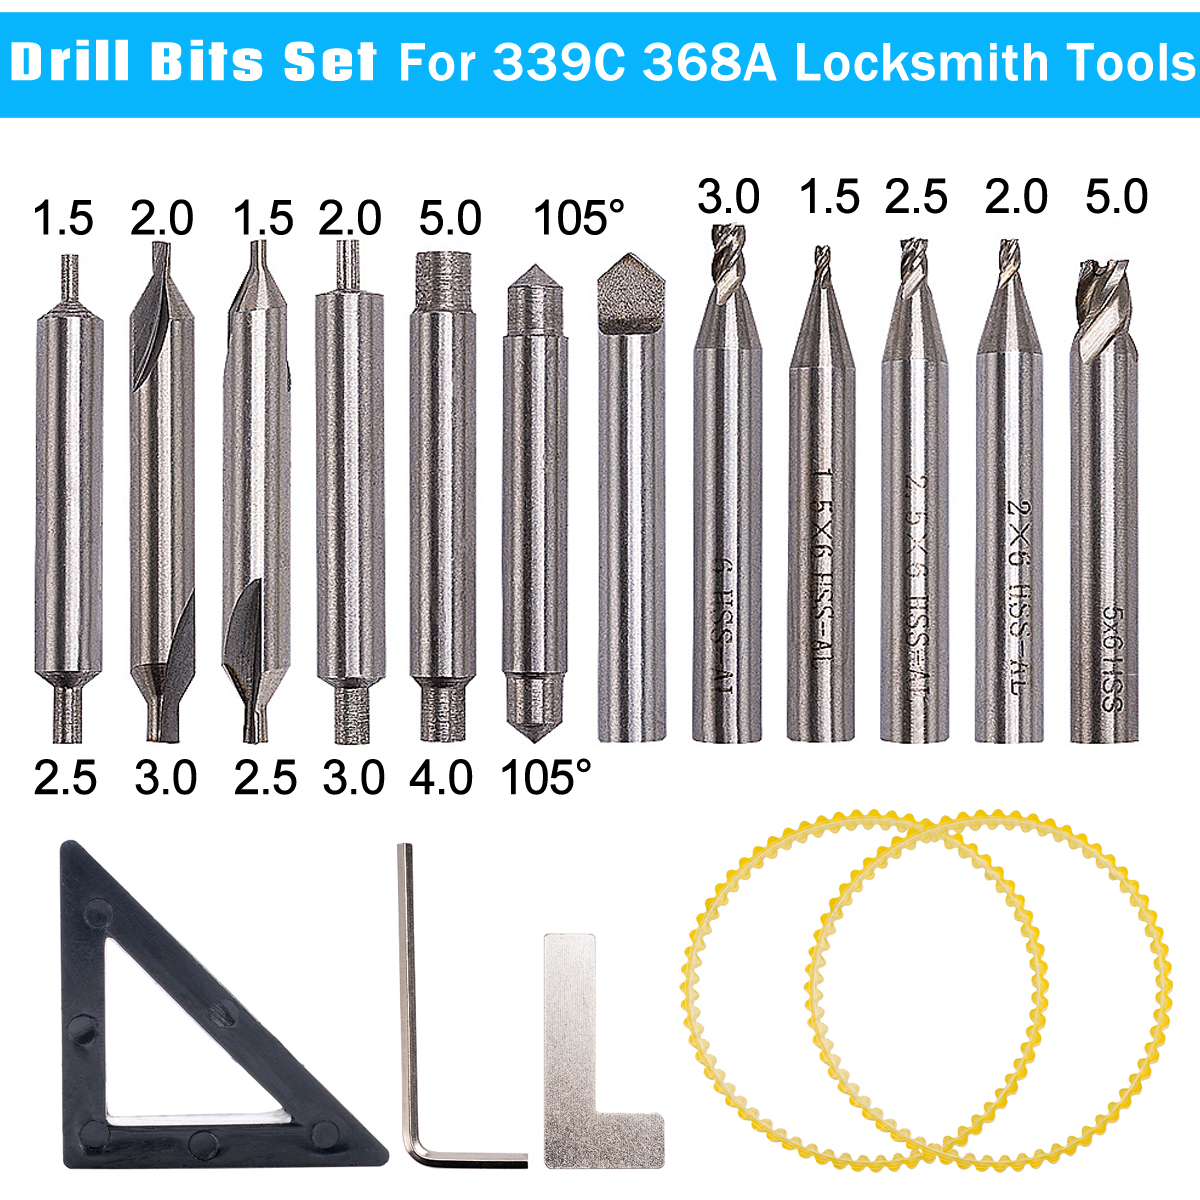 12pcs-HSS-Milling-Cutter-Drill-Bit-Set-Locksmith-Tools-Vertical-Spare-Parts-For-Key-Cutting-Machine-1403807-1